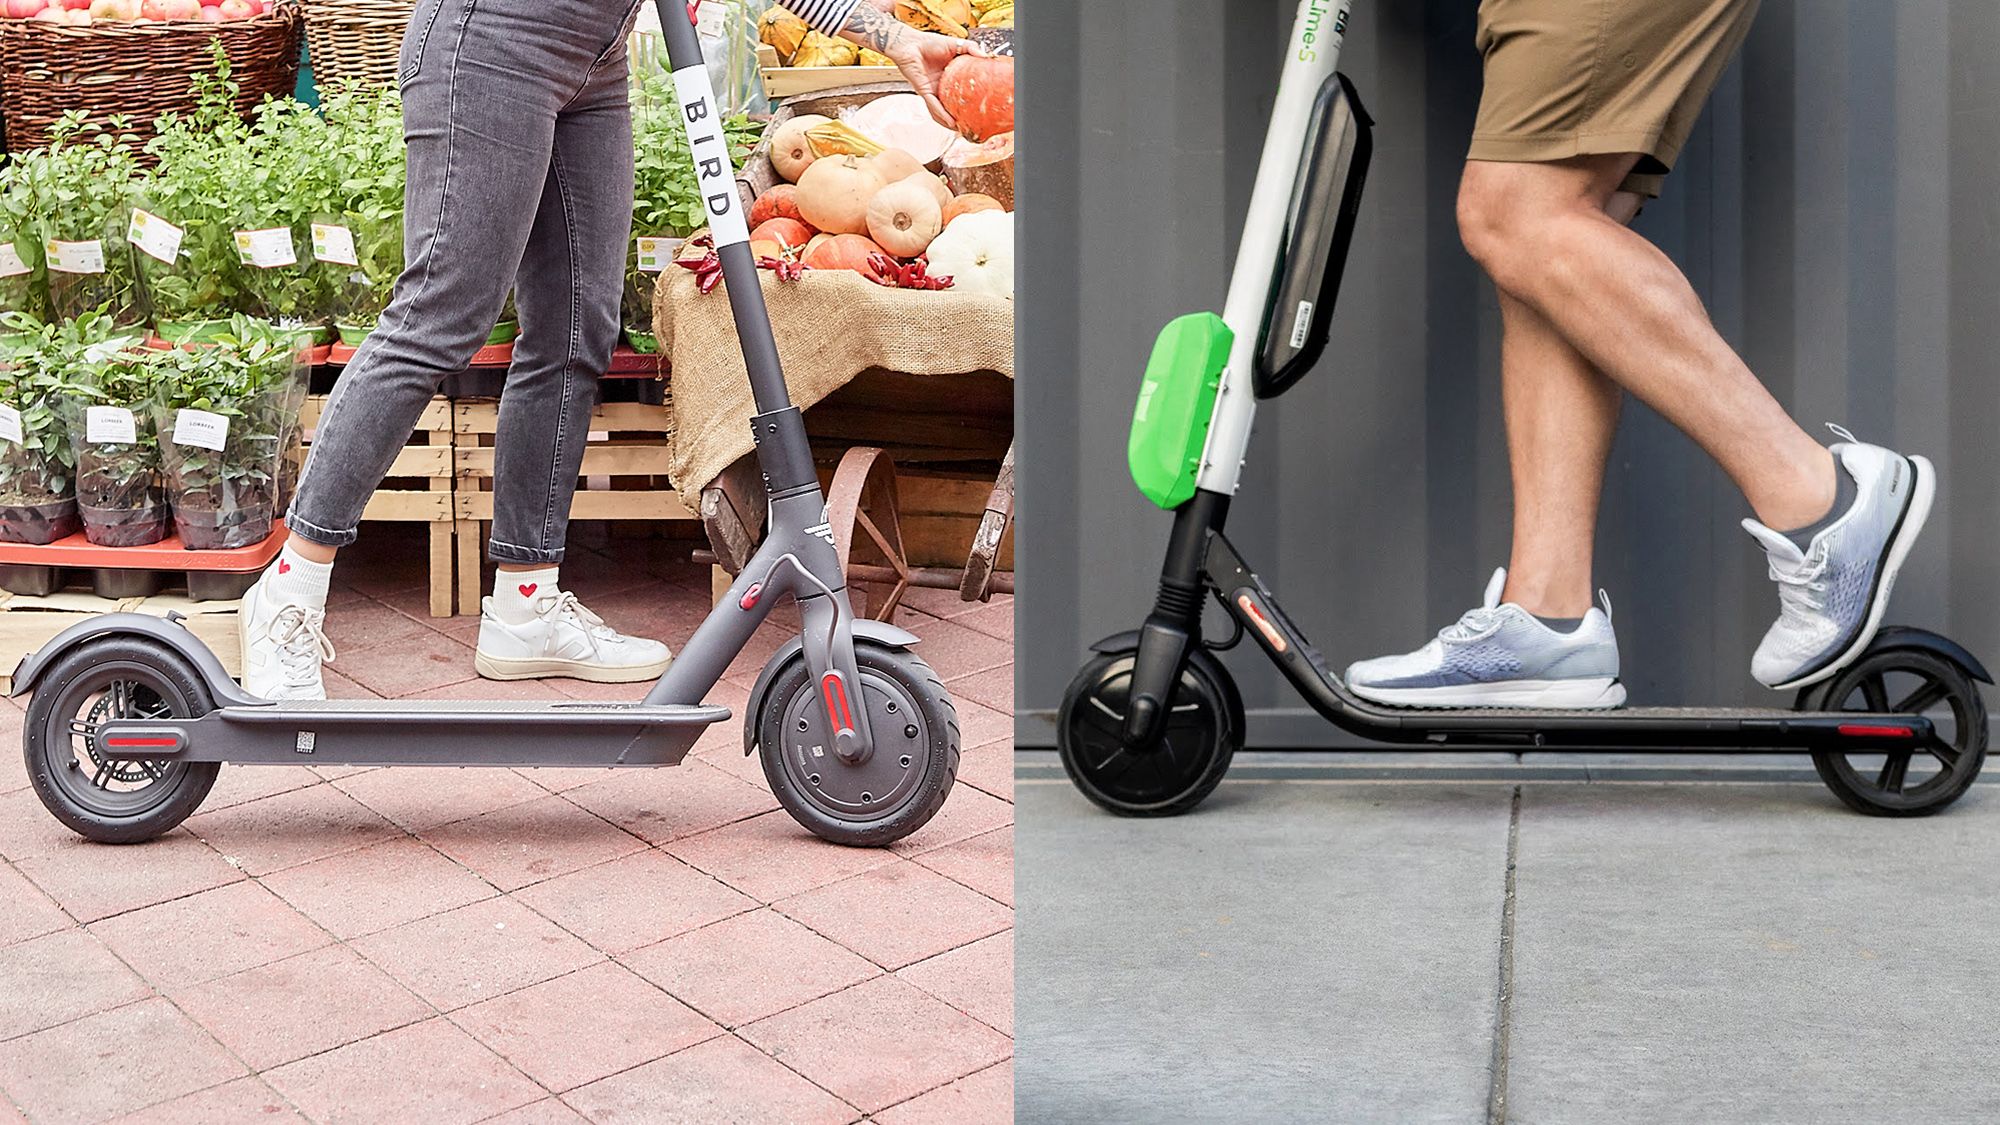 Top 5 most successful companies of electric kick scooter ride-sharing services